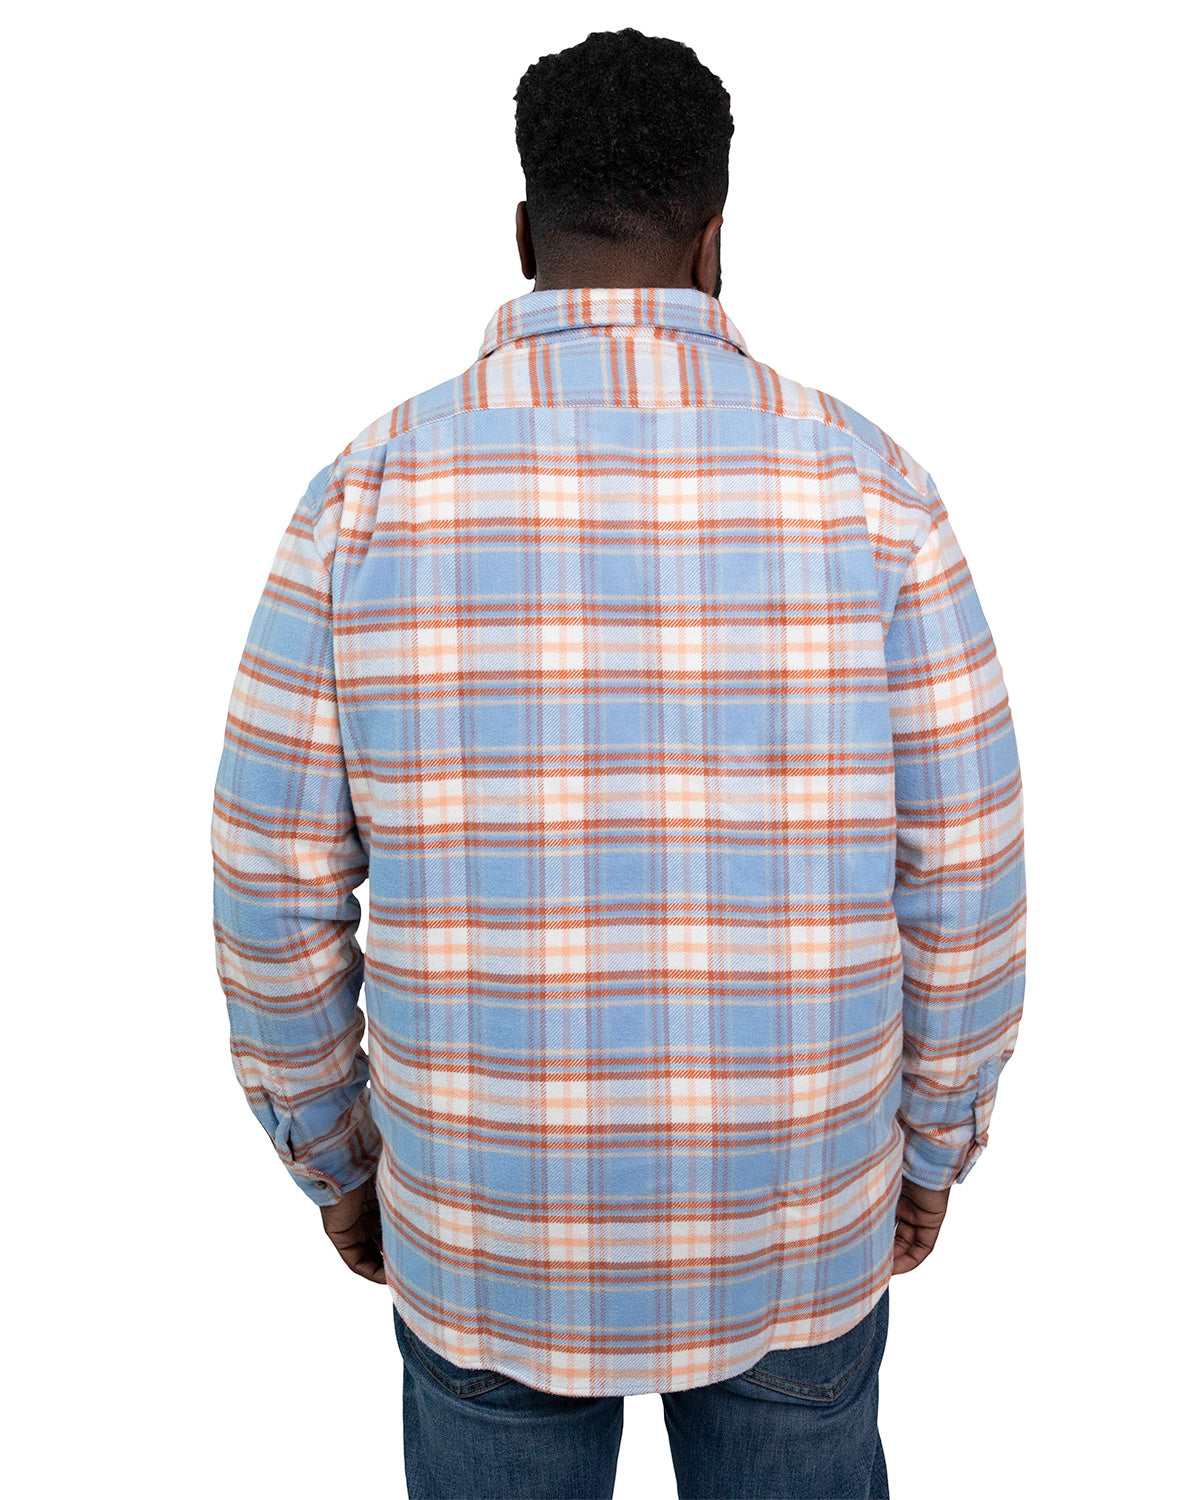 Relaxed Flannel, Sunrise Plaid – MuskOx Flannels